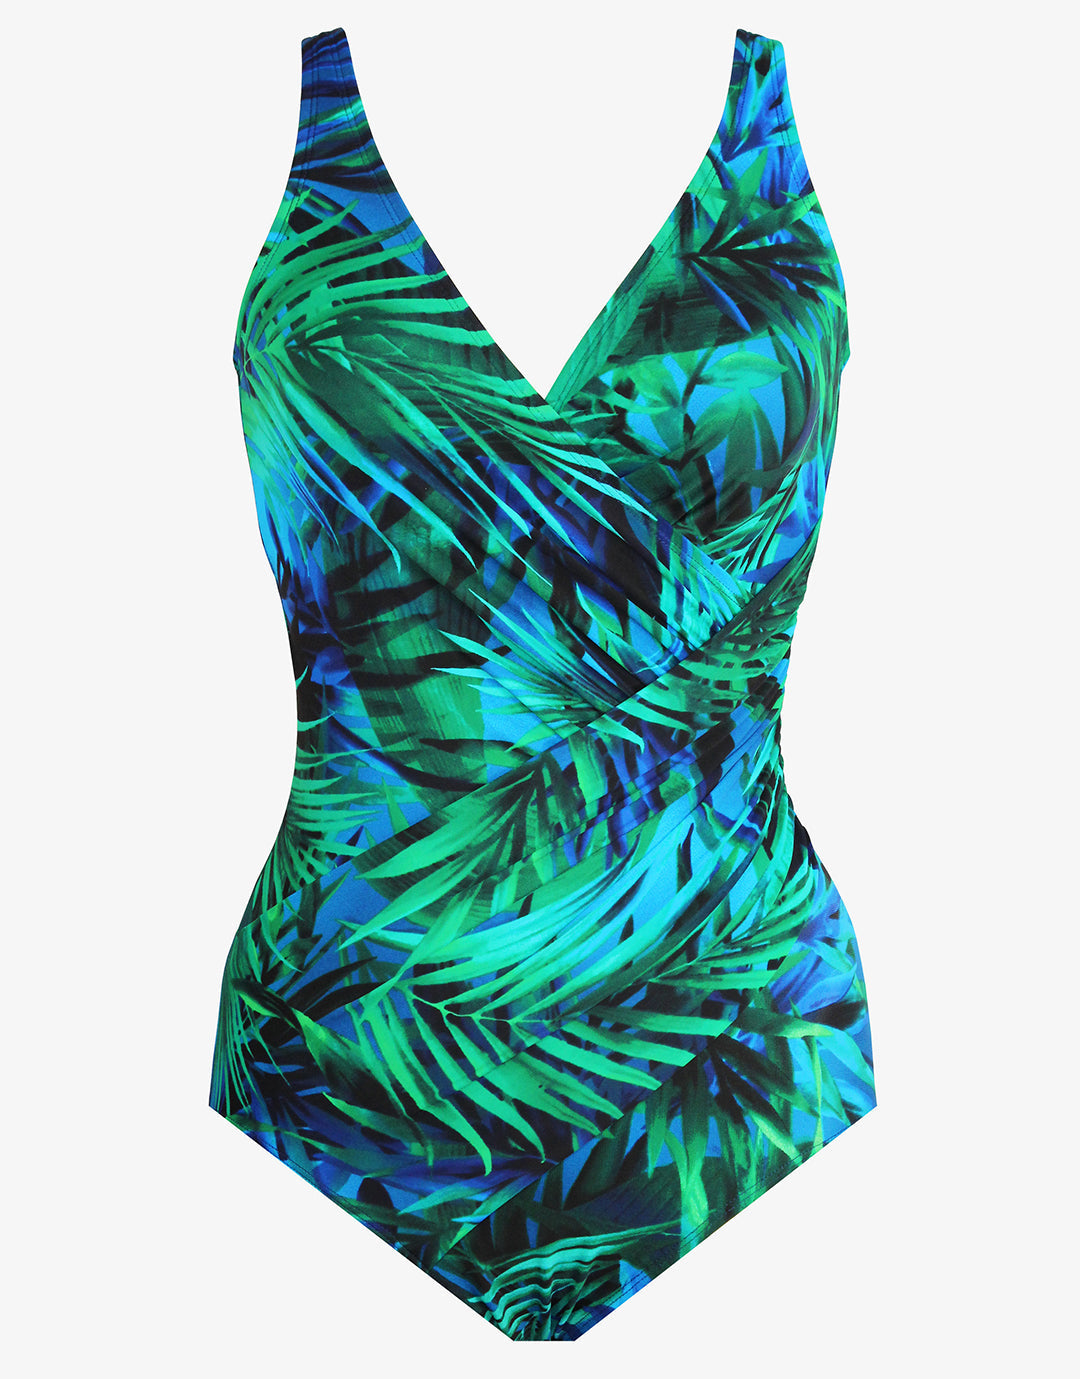 Palm Reeder Oceanus Swimsuit - Blue and Green - Simply Beach UK